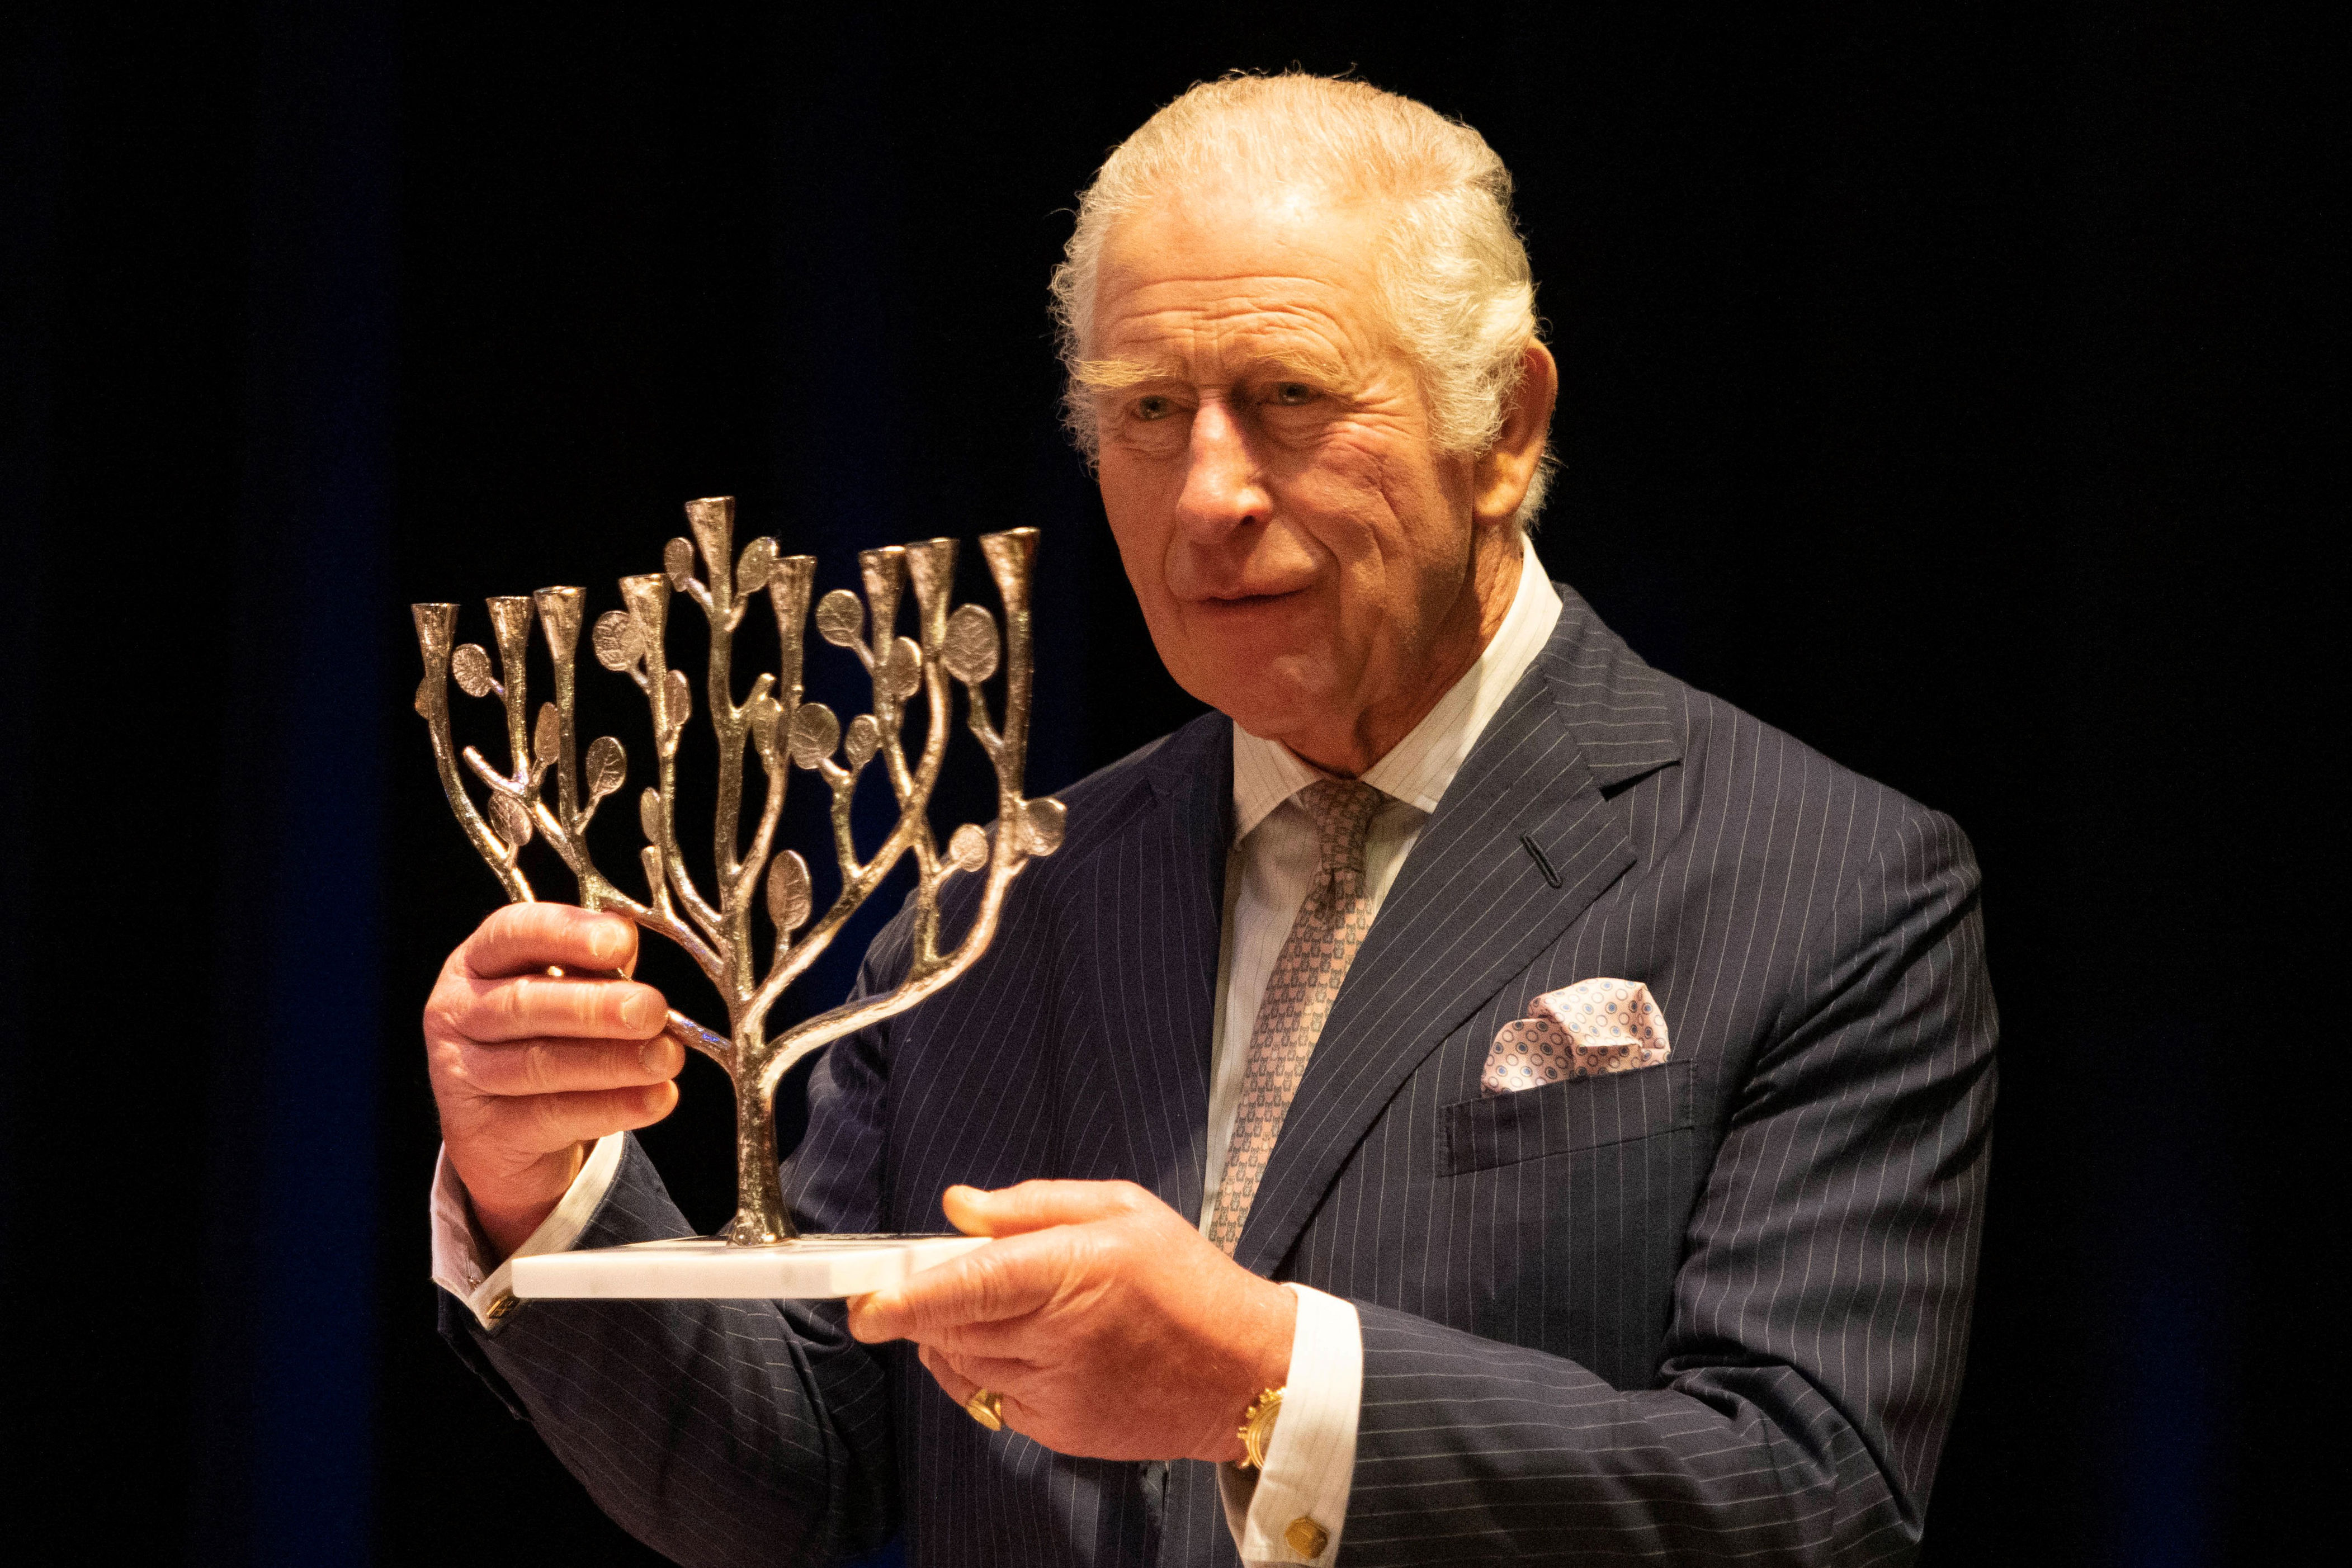 <p>King Charles III received a menorah during his visit to JW3, a Jewish community center that's open to all faiths and acts as a hub for the arts, culture, social action and learning in London on Dec. 16, 2022 -- two days before Hanukkah began.</p>